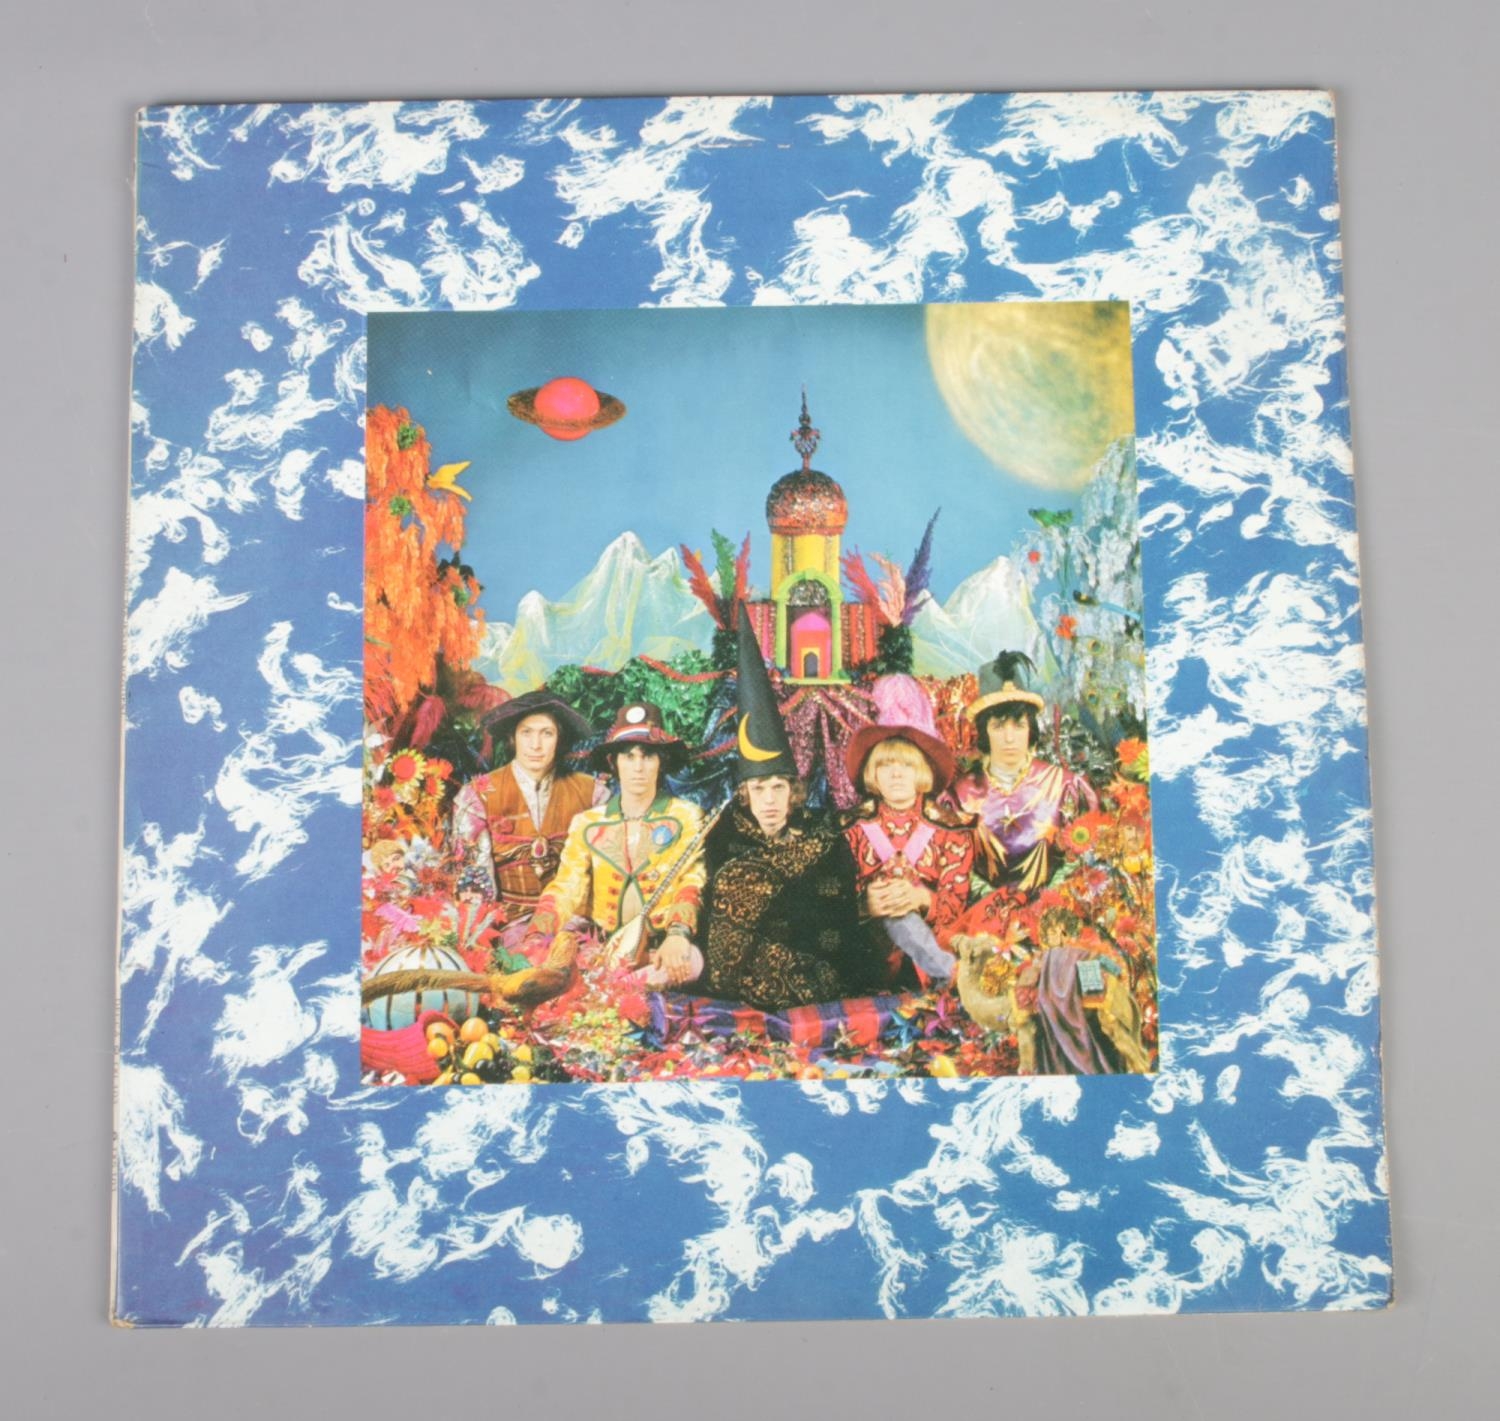 The Rolling Stones - Their Satanic Majesties Request; flat cover (1967). Decca, TXS. 103, ZAL-8126-